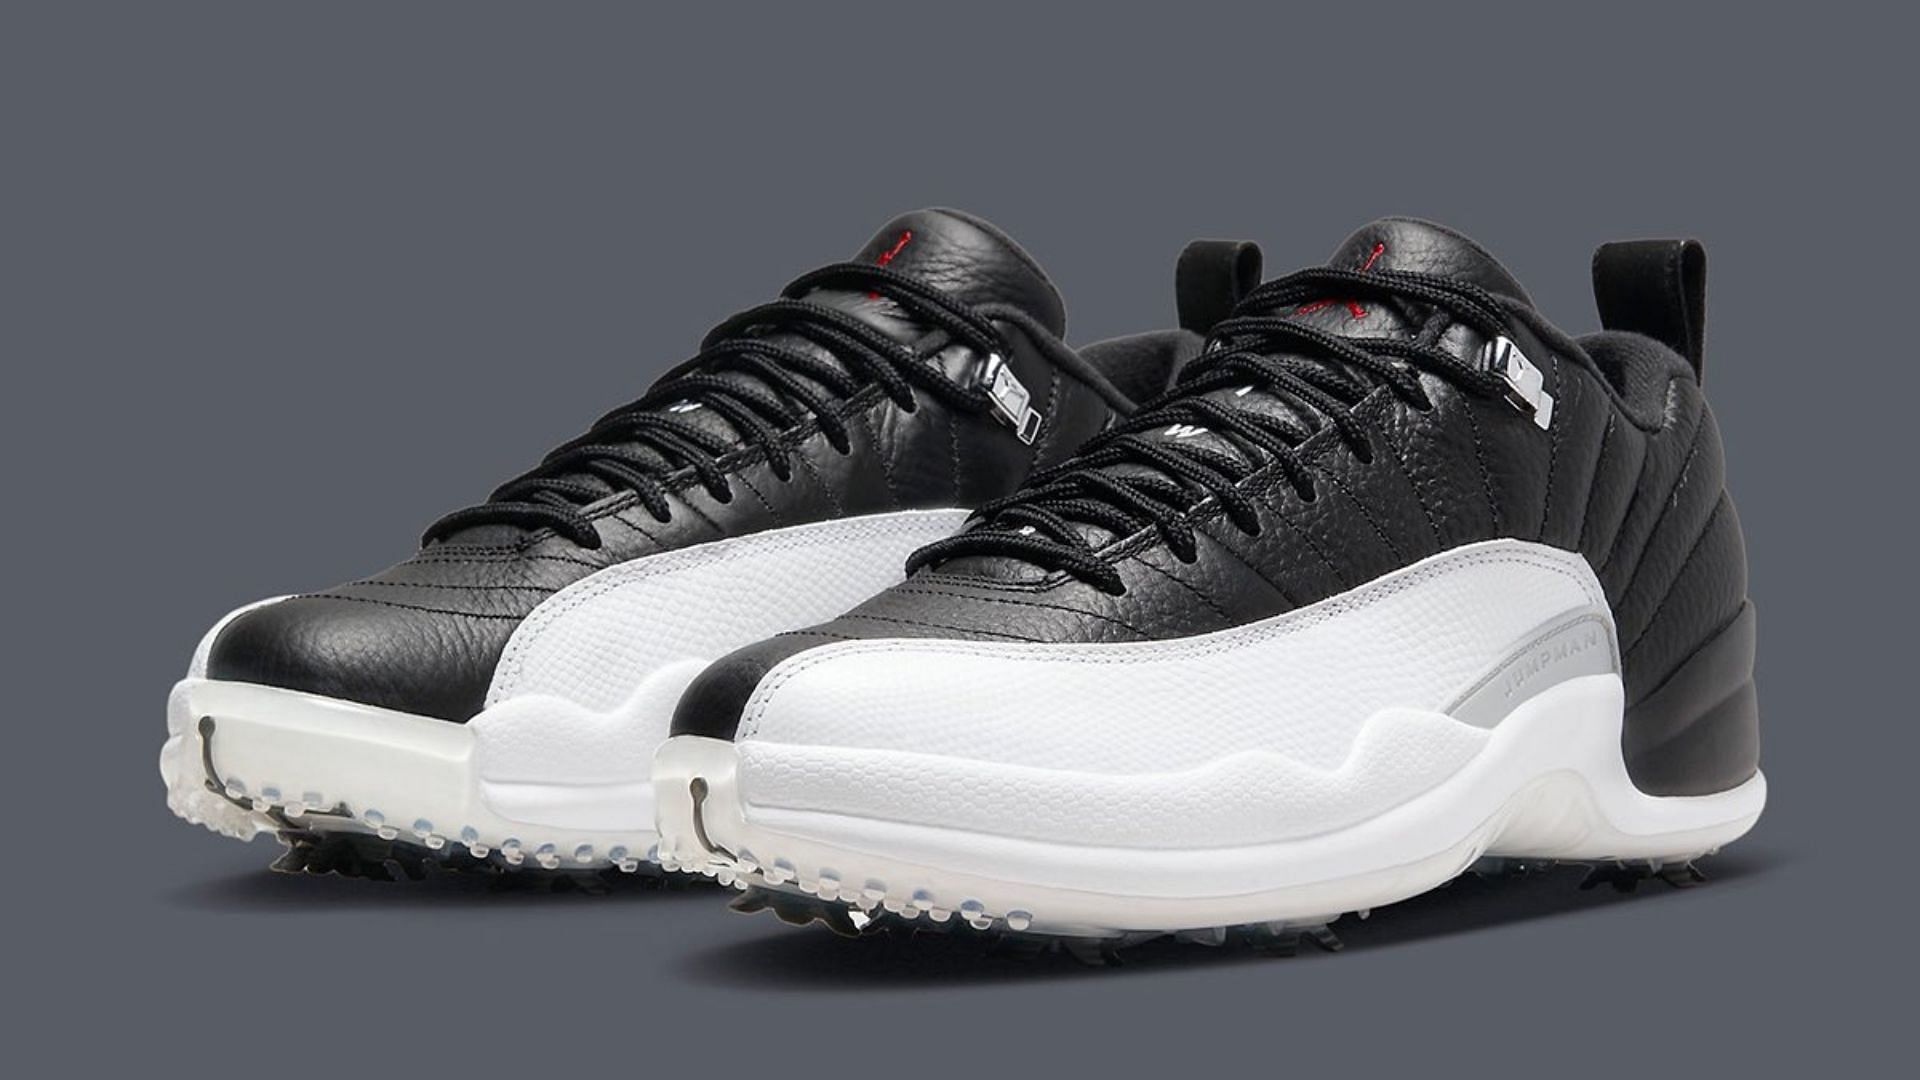 Where to buy Air Jordan 12 Low Golf “Playoffs” shoes? Price and more ...